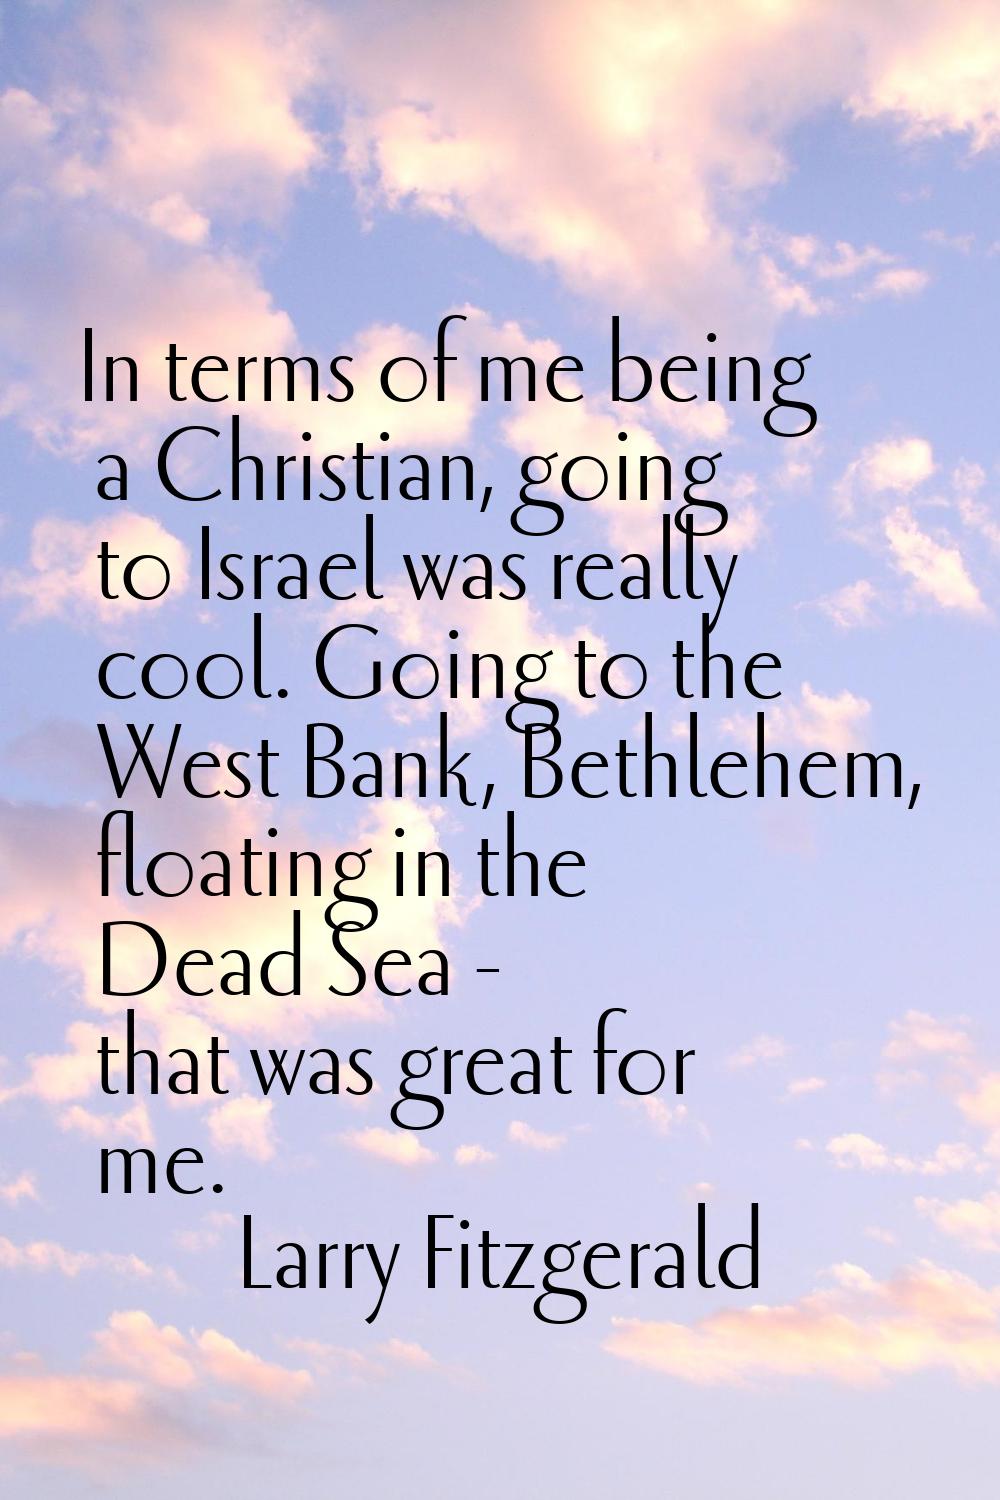 In terms of me being a Christian, going to Israel was really cool. Going to the West Bank, Bethlehe